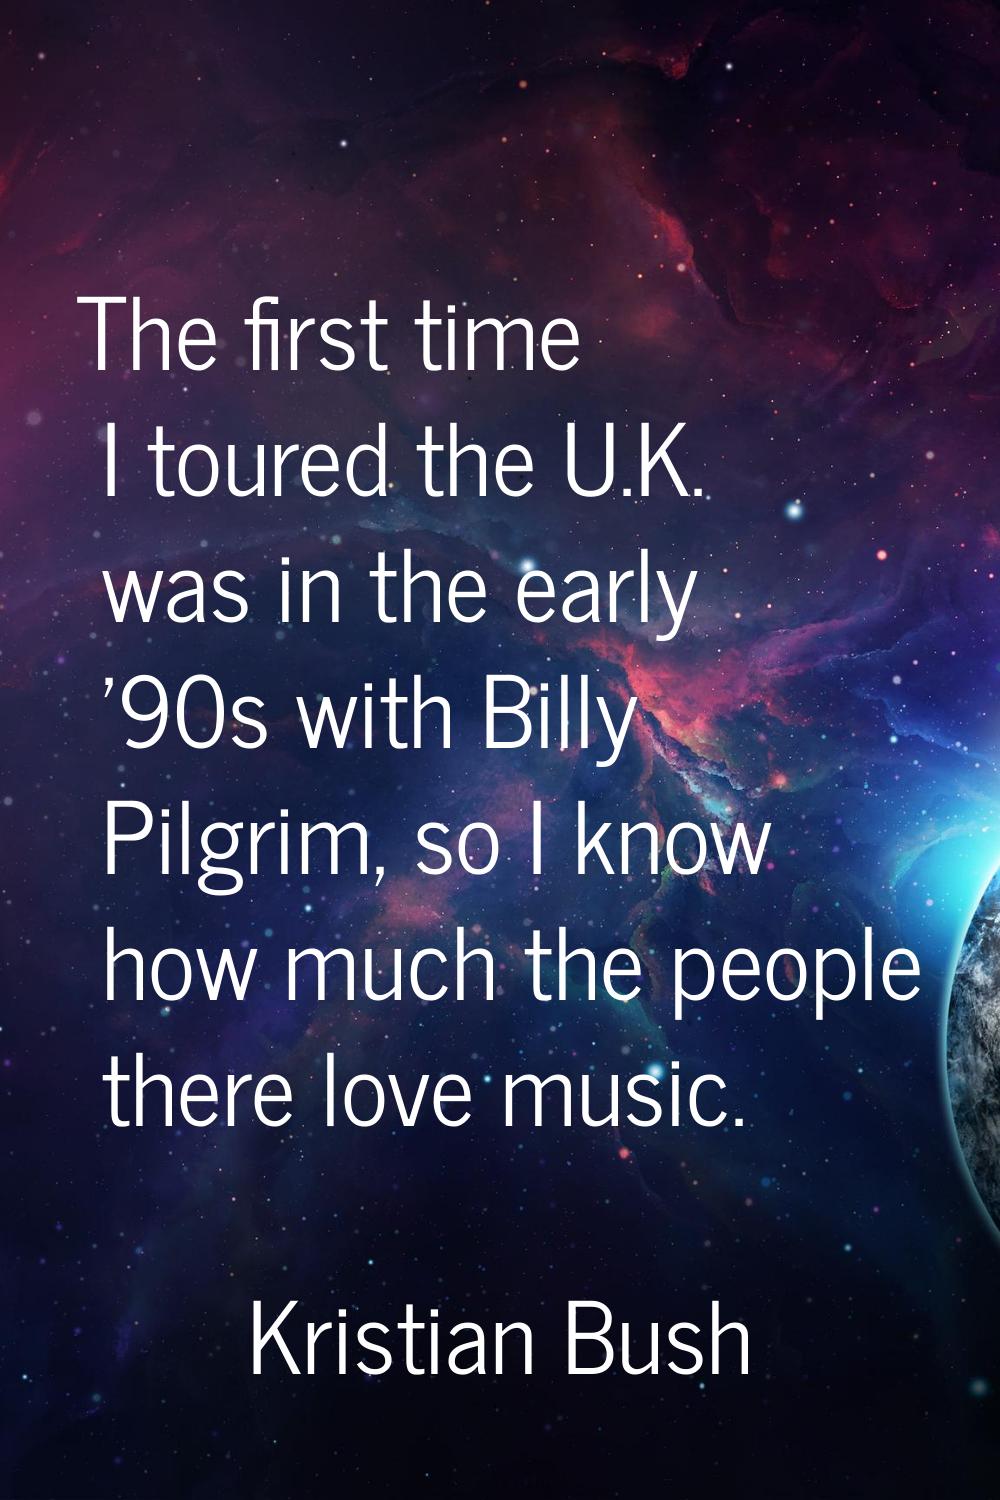 The first time I toured the U.K. was in the early '90s with Billy Pilgrim, so I know how much the p